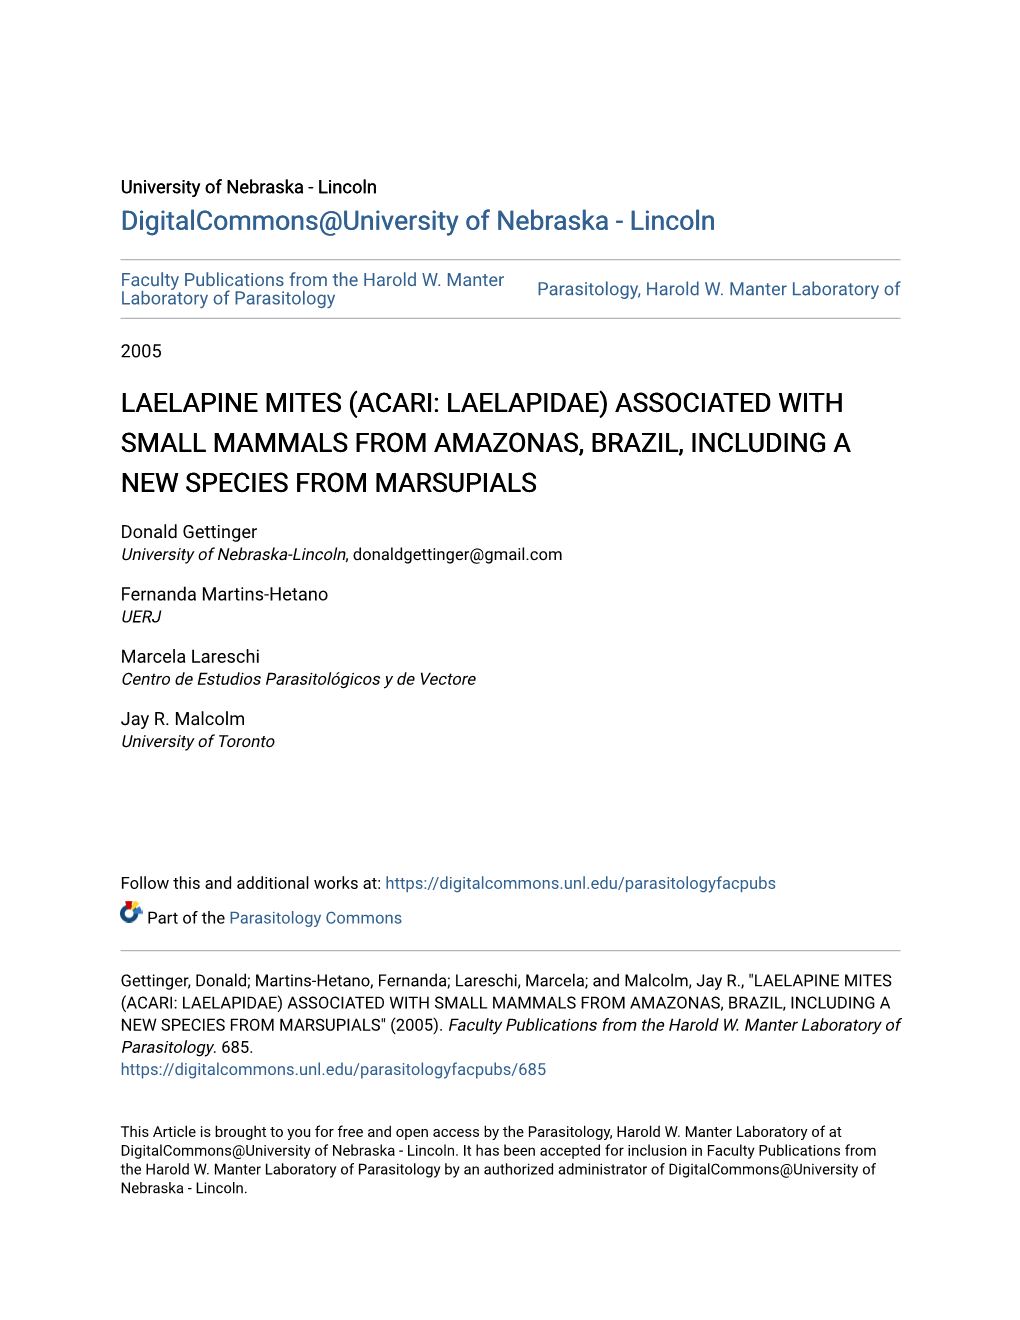 Laelapine Mites (Acari: Laelapidae) Associated with Small Mammals from Amazonas, Brazil, Including a New Species from Marsupials